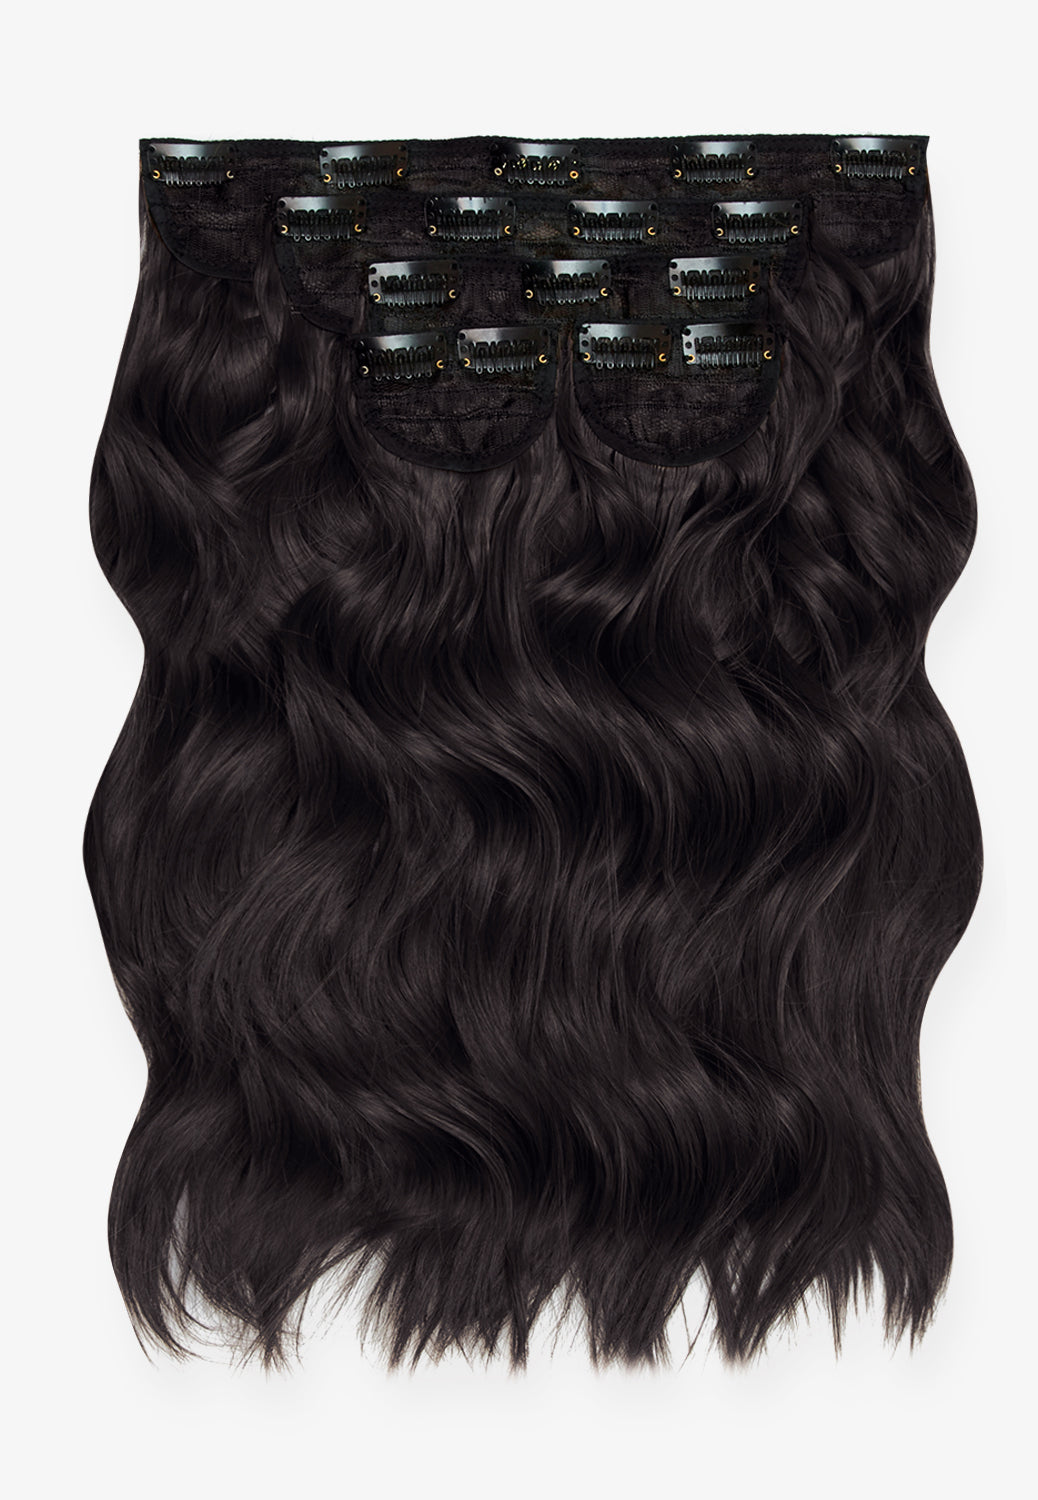 Super Thick 16’’ 5 Piece Brushed Out Wave Clip In Hair Extensions + Hair Care Bundle - Raven